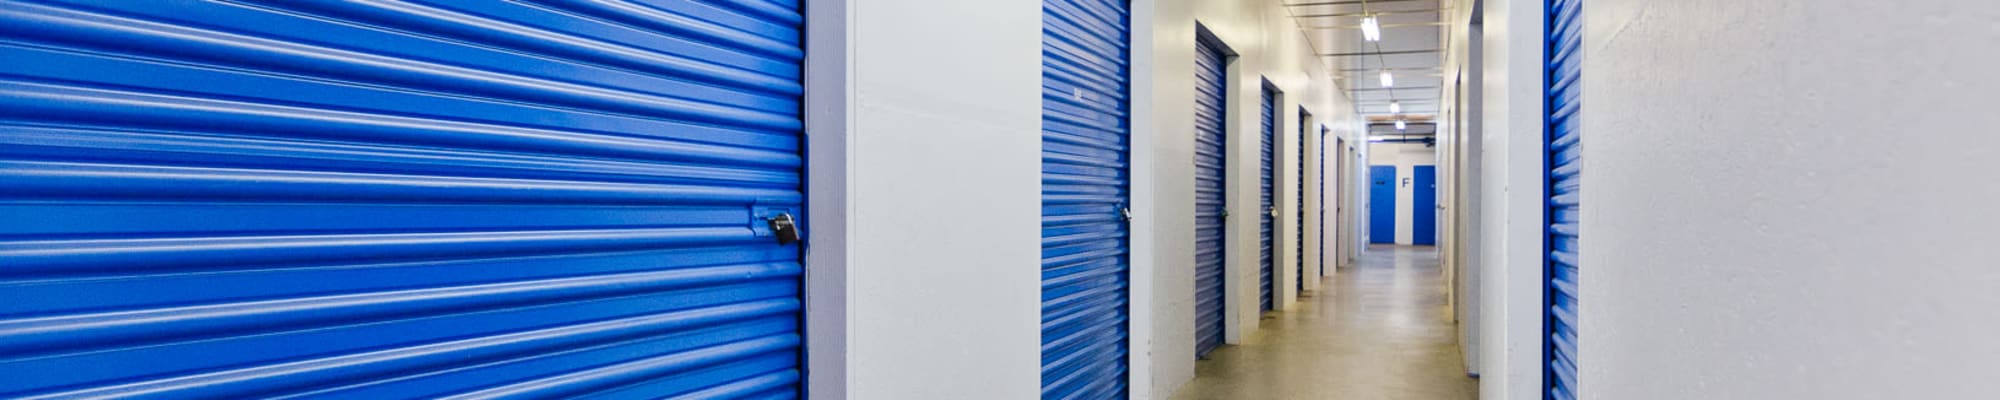 Pay Online at A-American Self Storage in Los Angeles, California